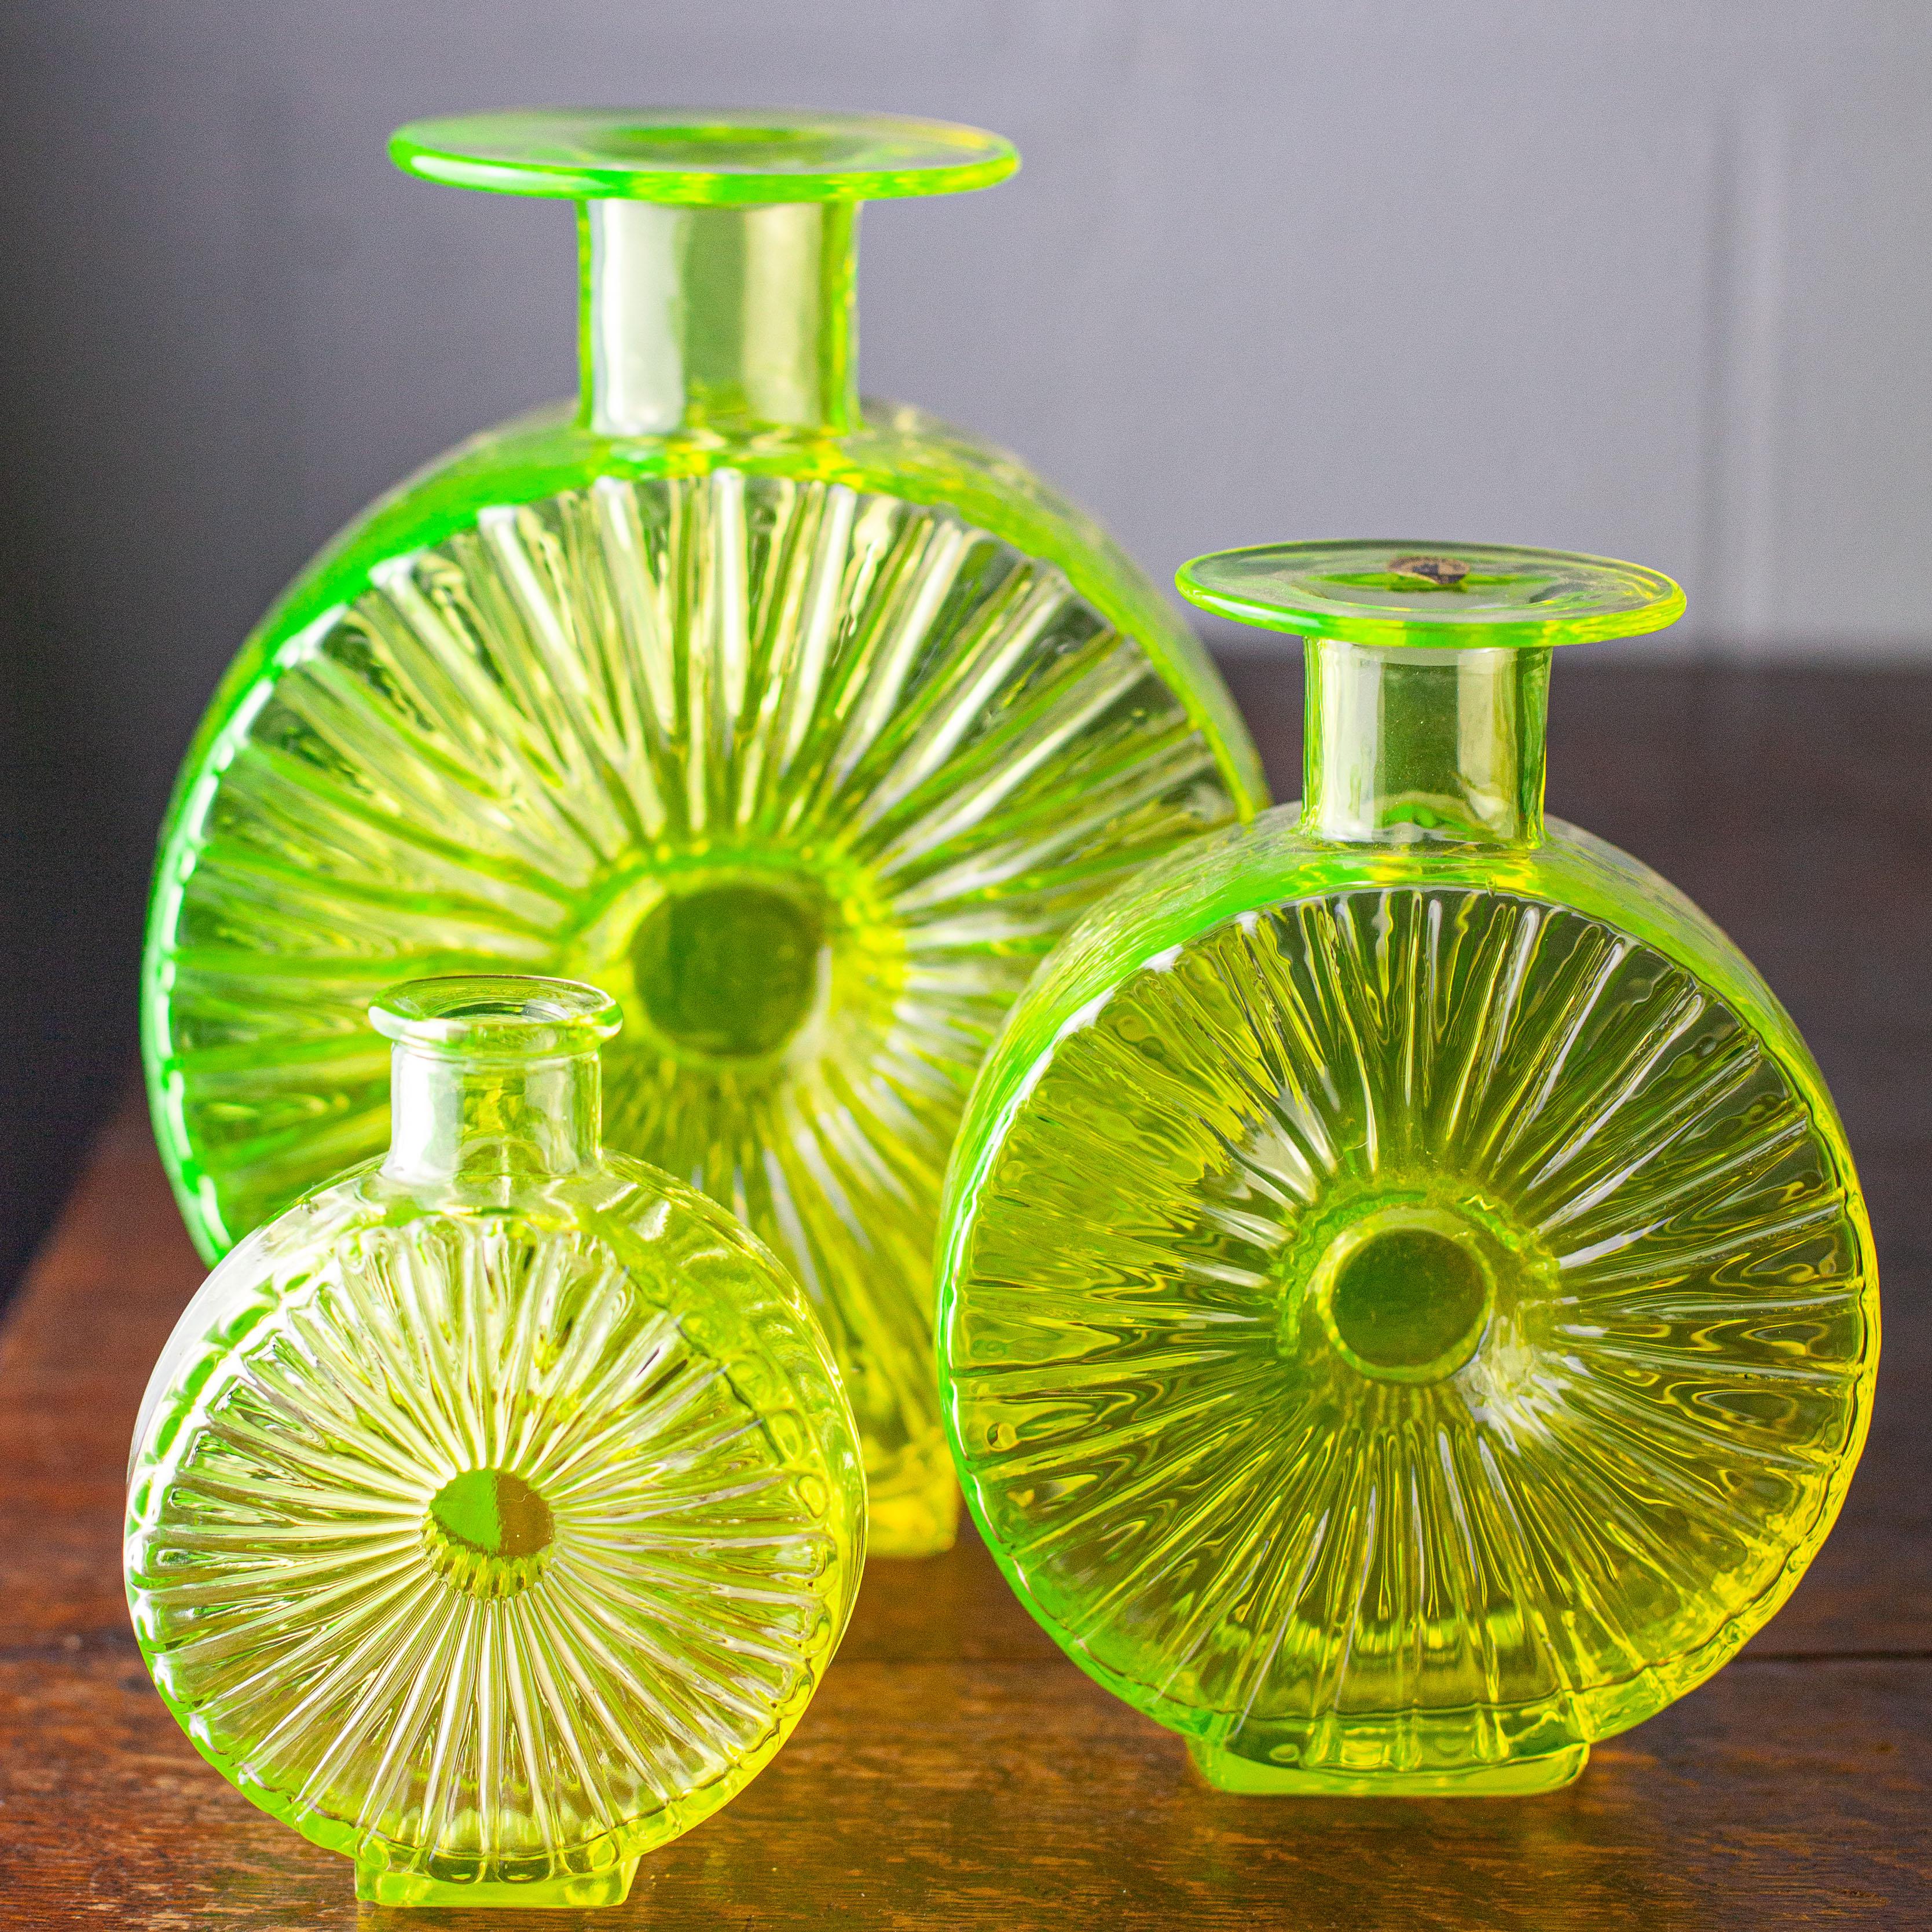 A stunning collection of three Scandinavian uranium glass 'Aurinkopullo' (or Sun Bottle) decorative vases. Made by Riihimaki (also known as Riihimaen Lasi Oy) of Finland from 1964-1974 and designed by Helena Tynell in 1963. 

This is perhaps